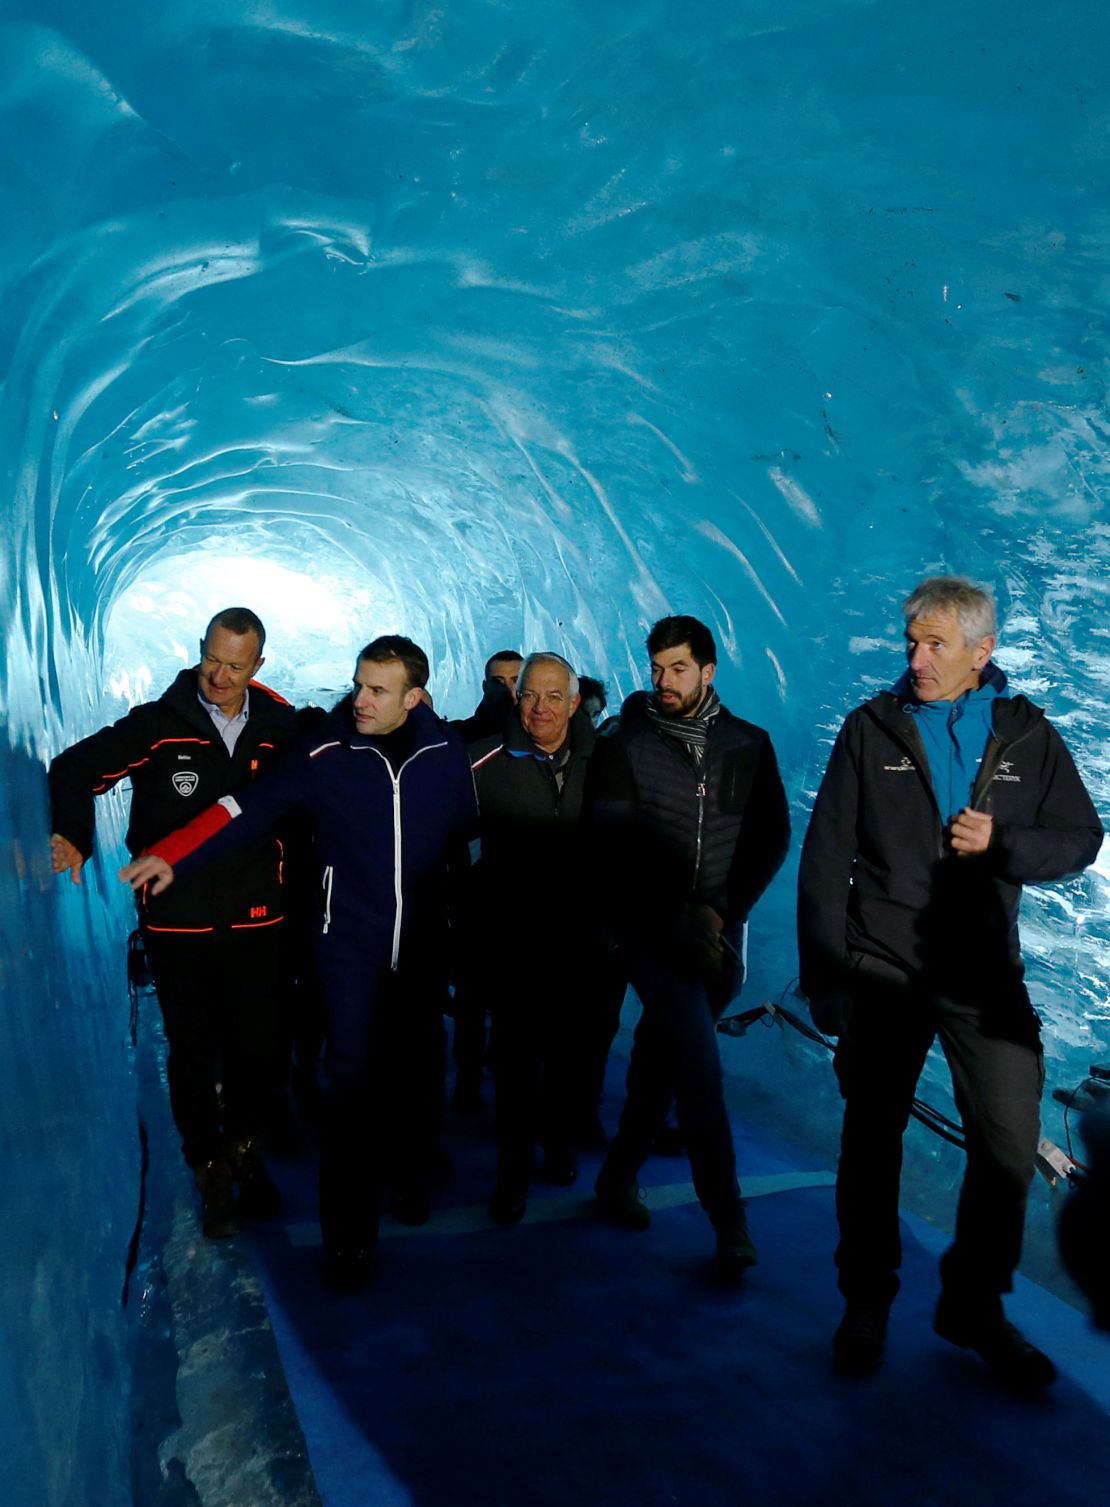 French president Emmanuel Macron visits the Mer de Glace glacier near Chamonix, France in the French Alps.